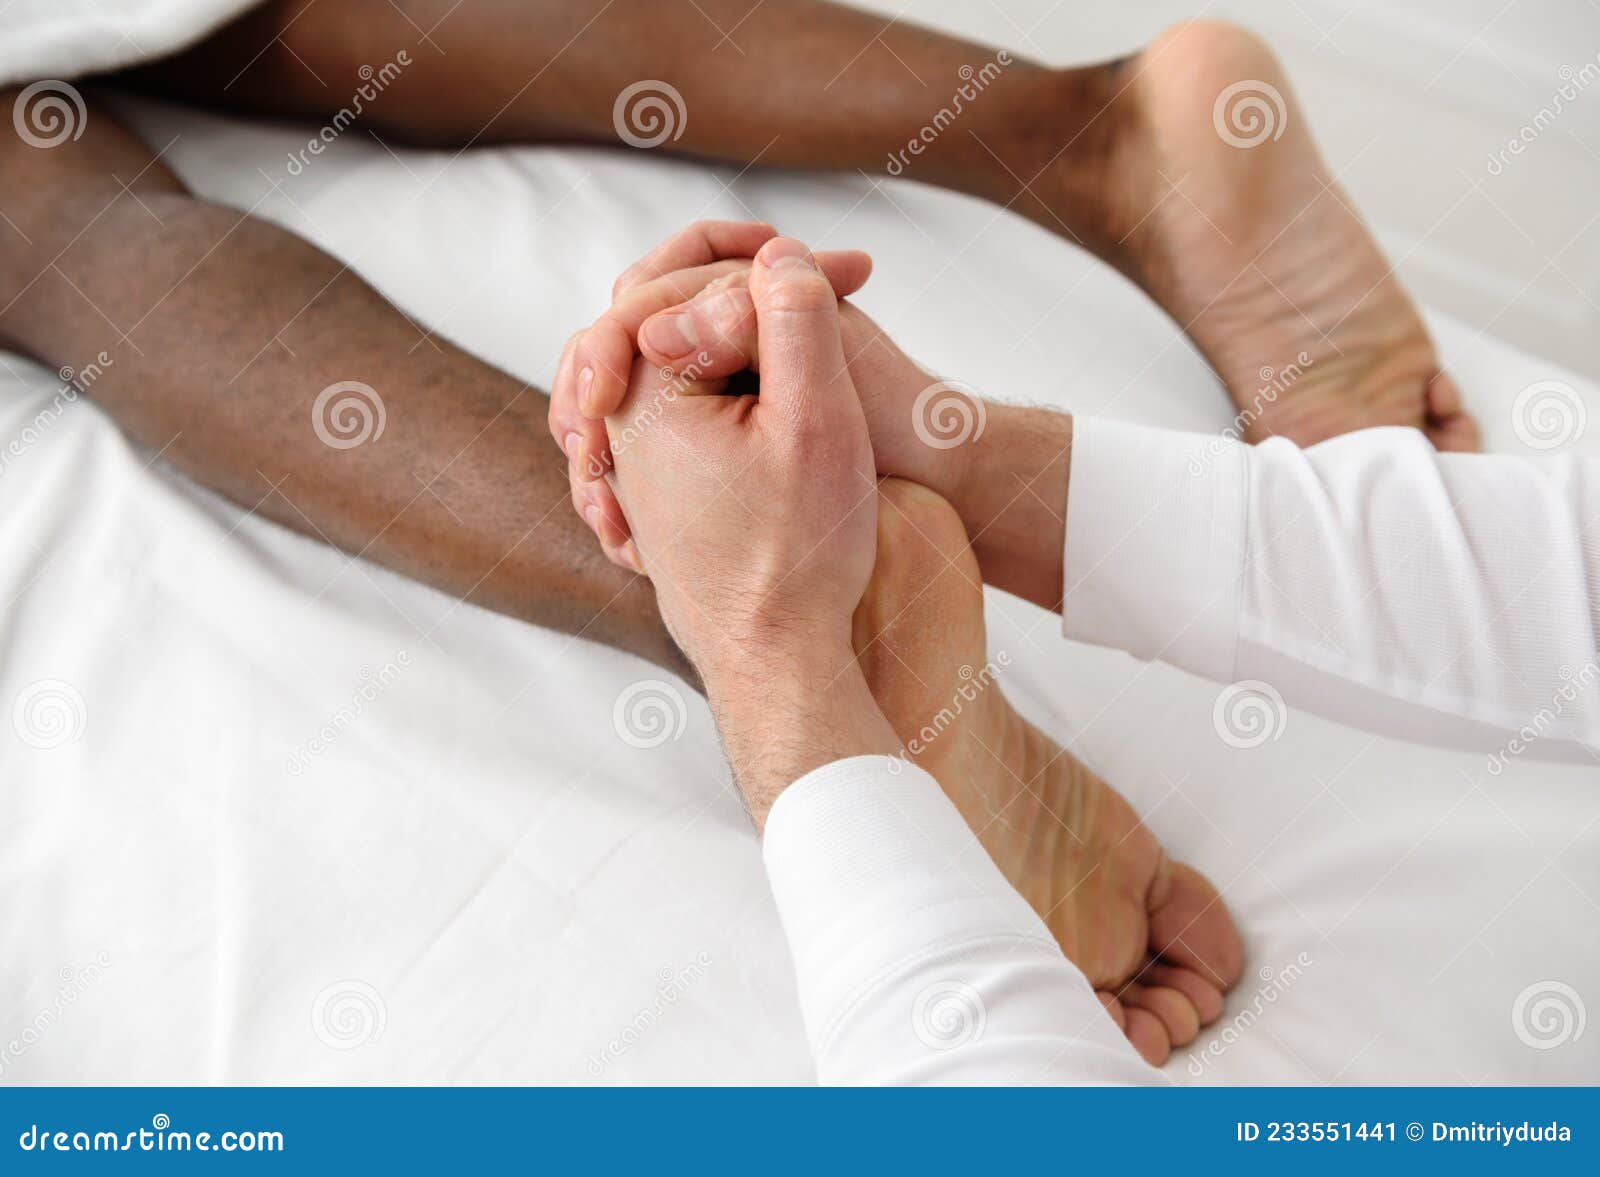 African American Man Having Foot Massage in Spa, White Background pic pic